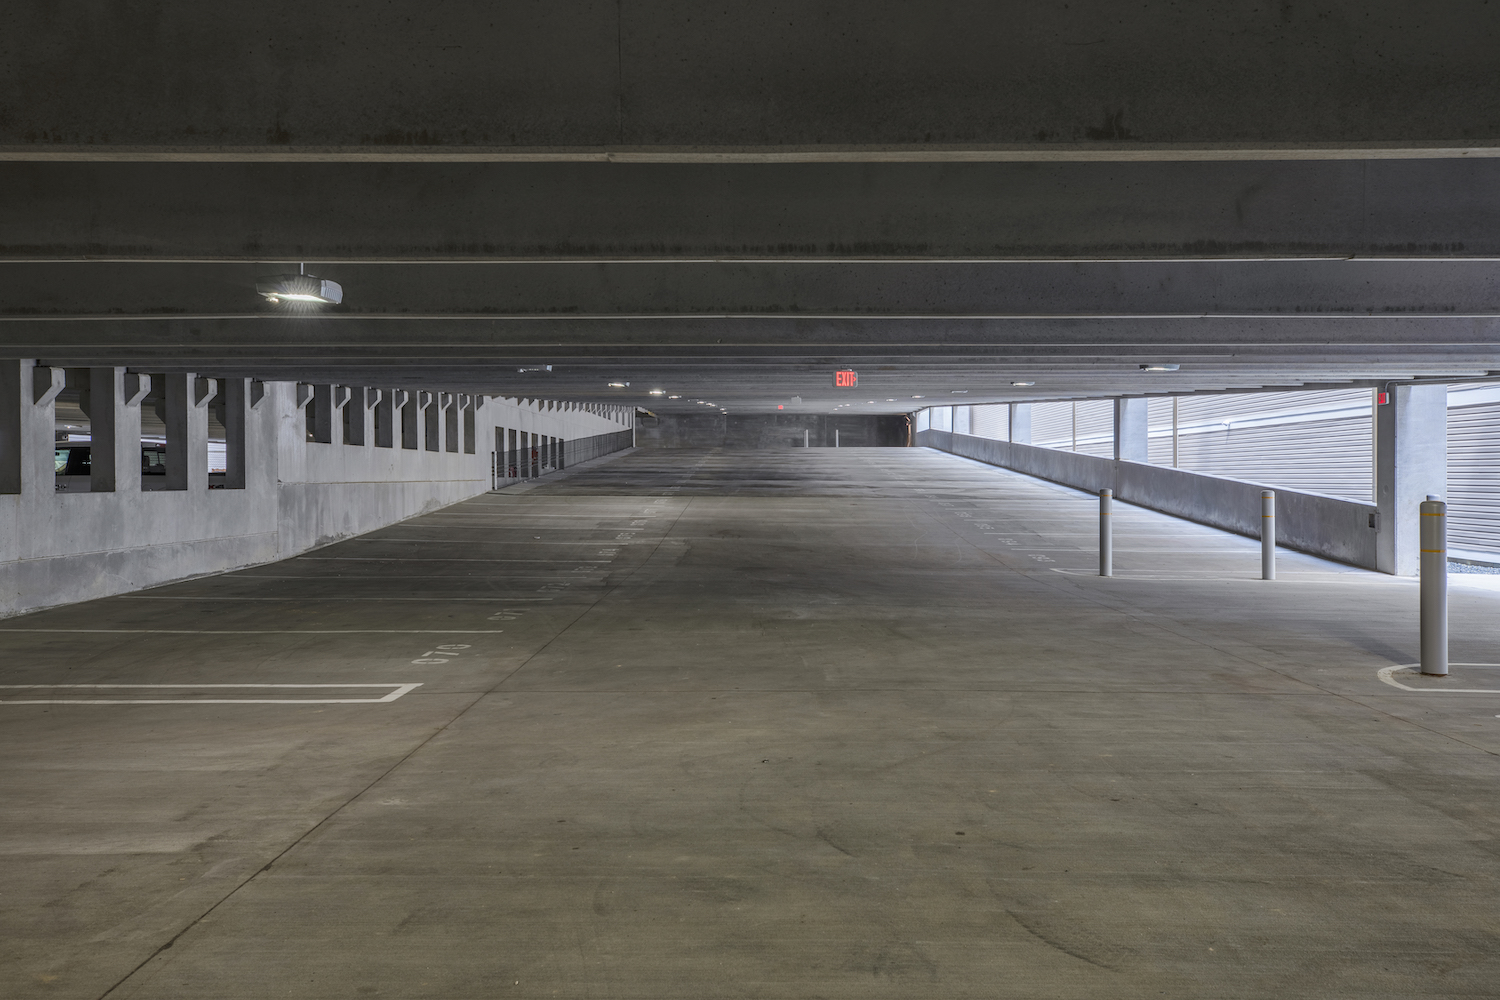 Parking garage with assigned spaces